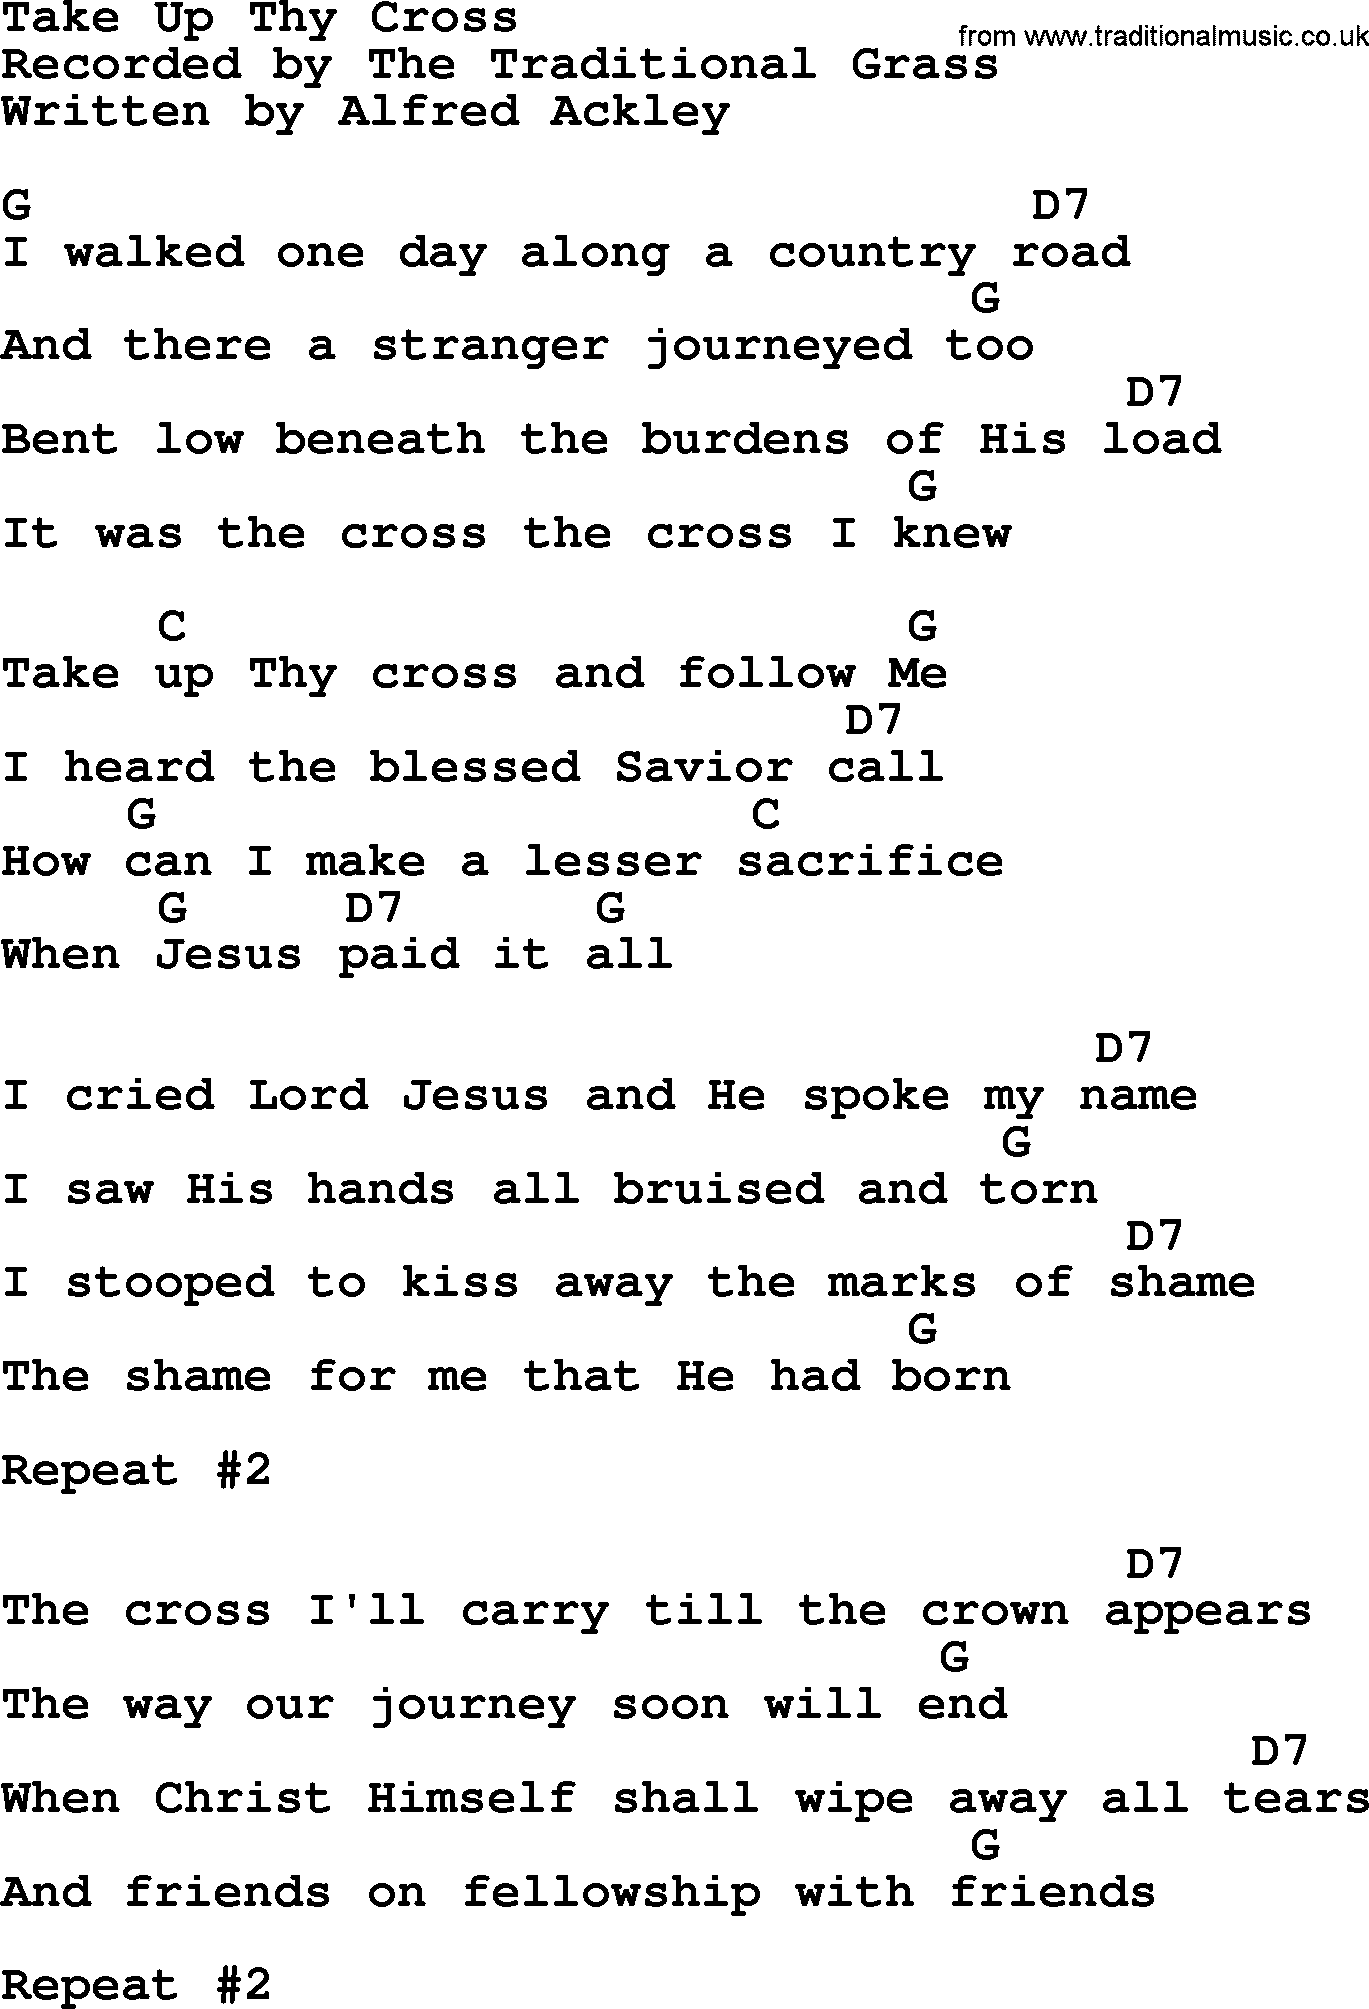 Bluegrass song: Take Up Thy Cross, lyrics and chords